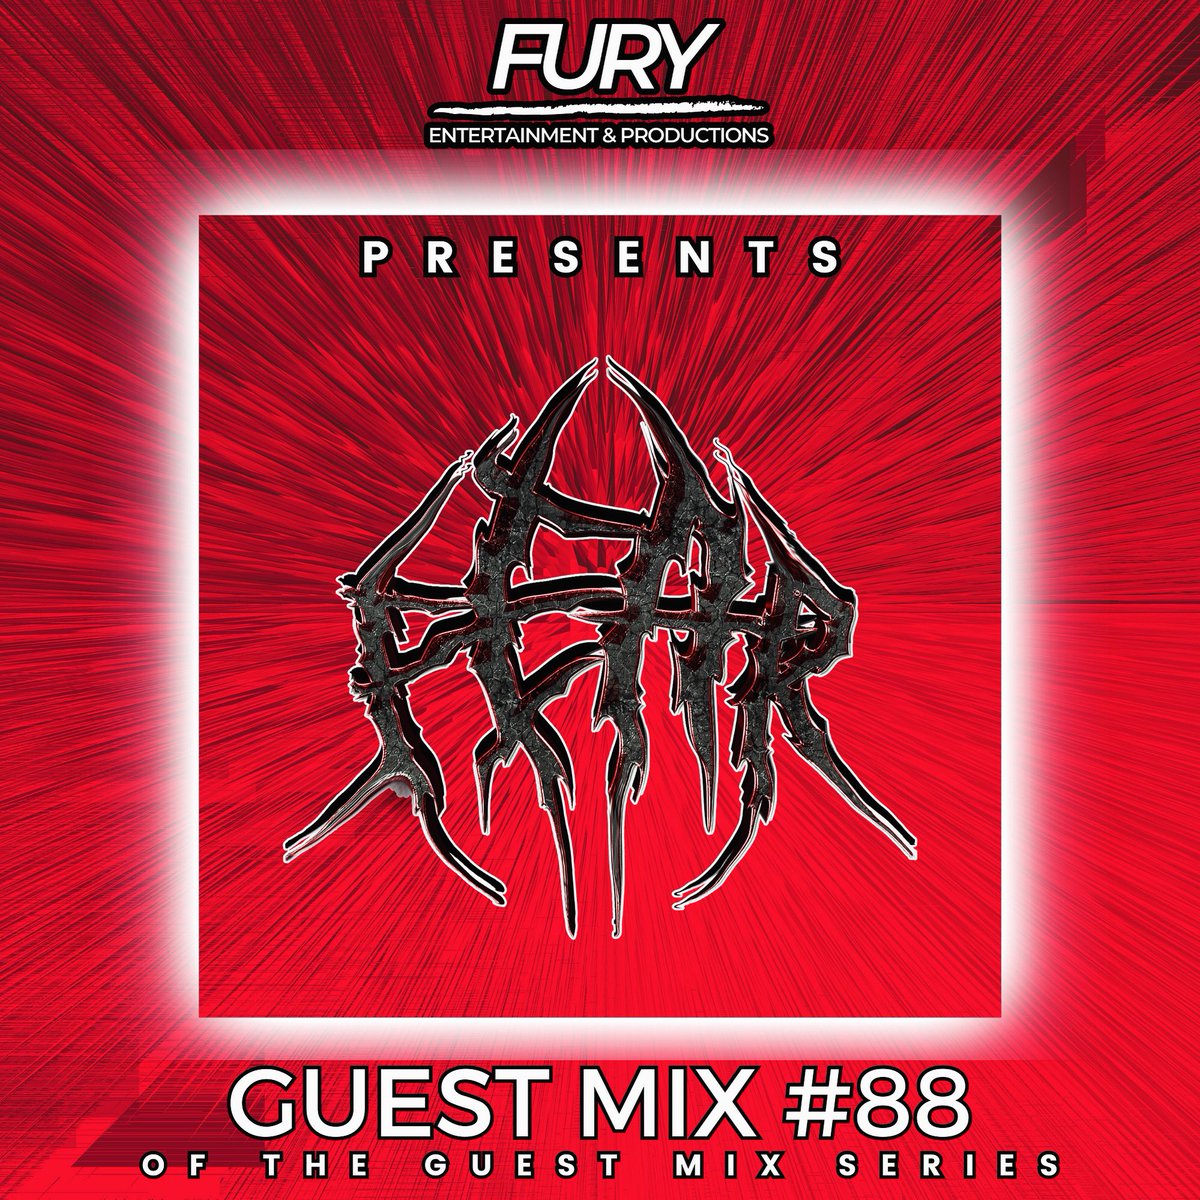 Guest Mix #88. ft. @FEARHASARRIVED 😈 Dropping this Friday, April 26th🤘🏽 Be sure to follow so you don’t miss it when it drops 🗓️